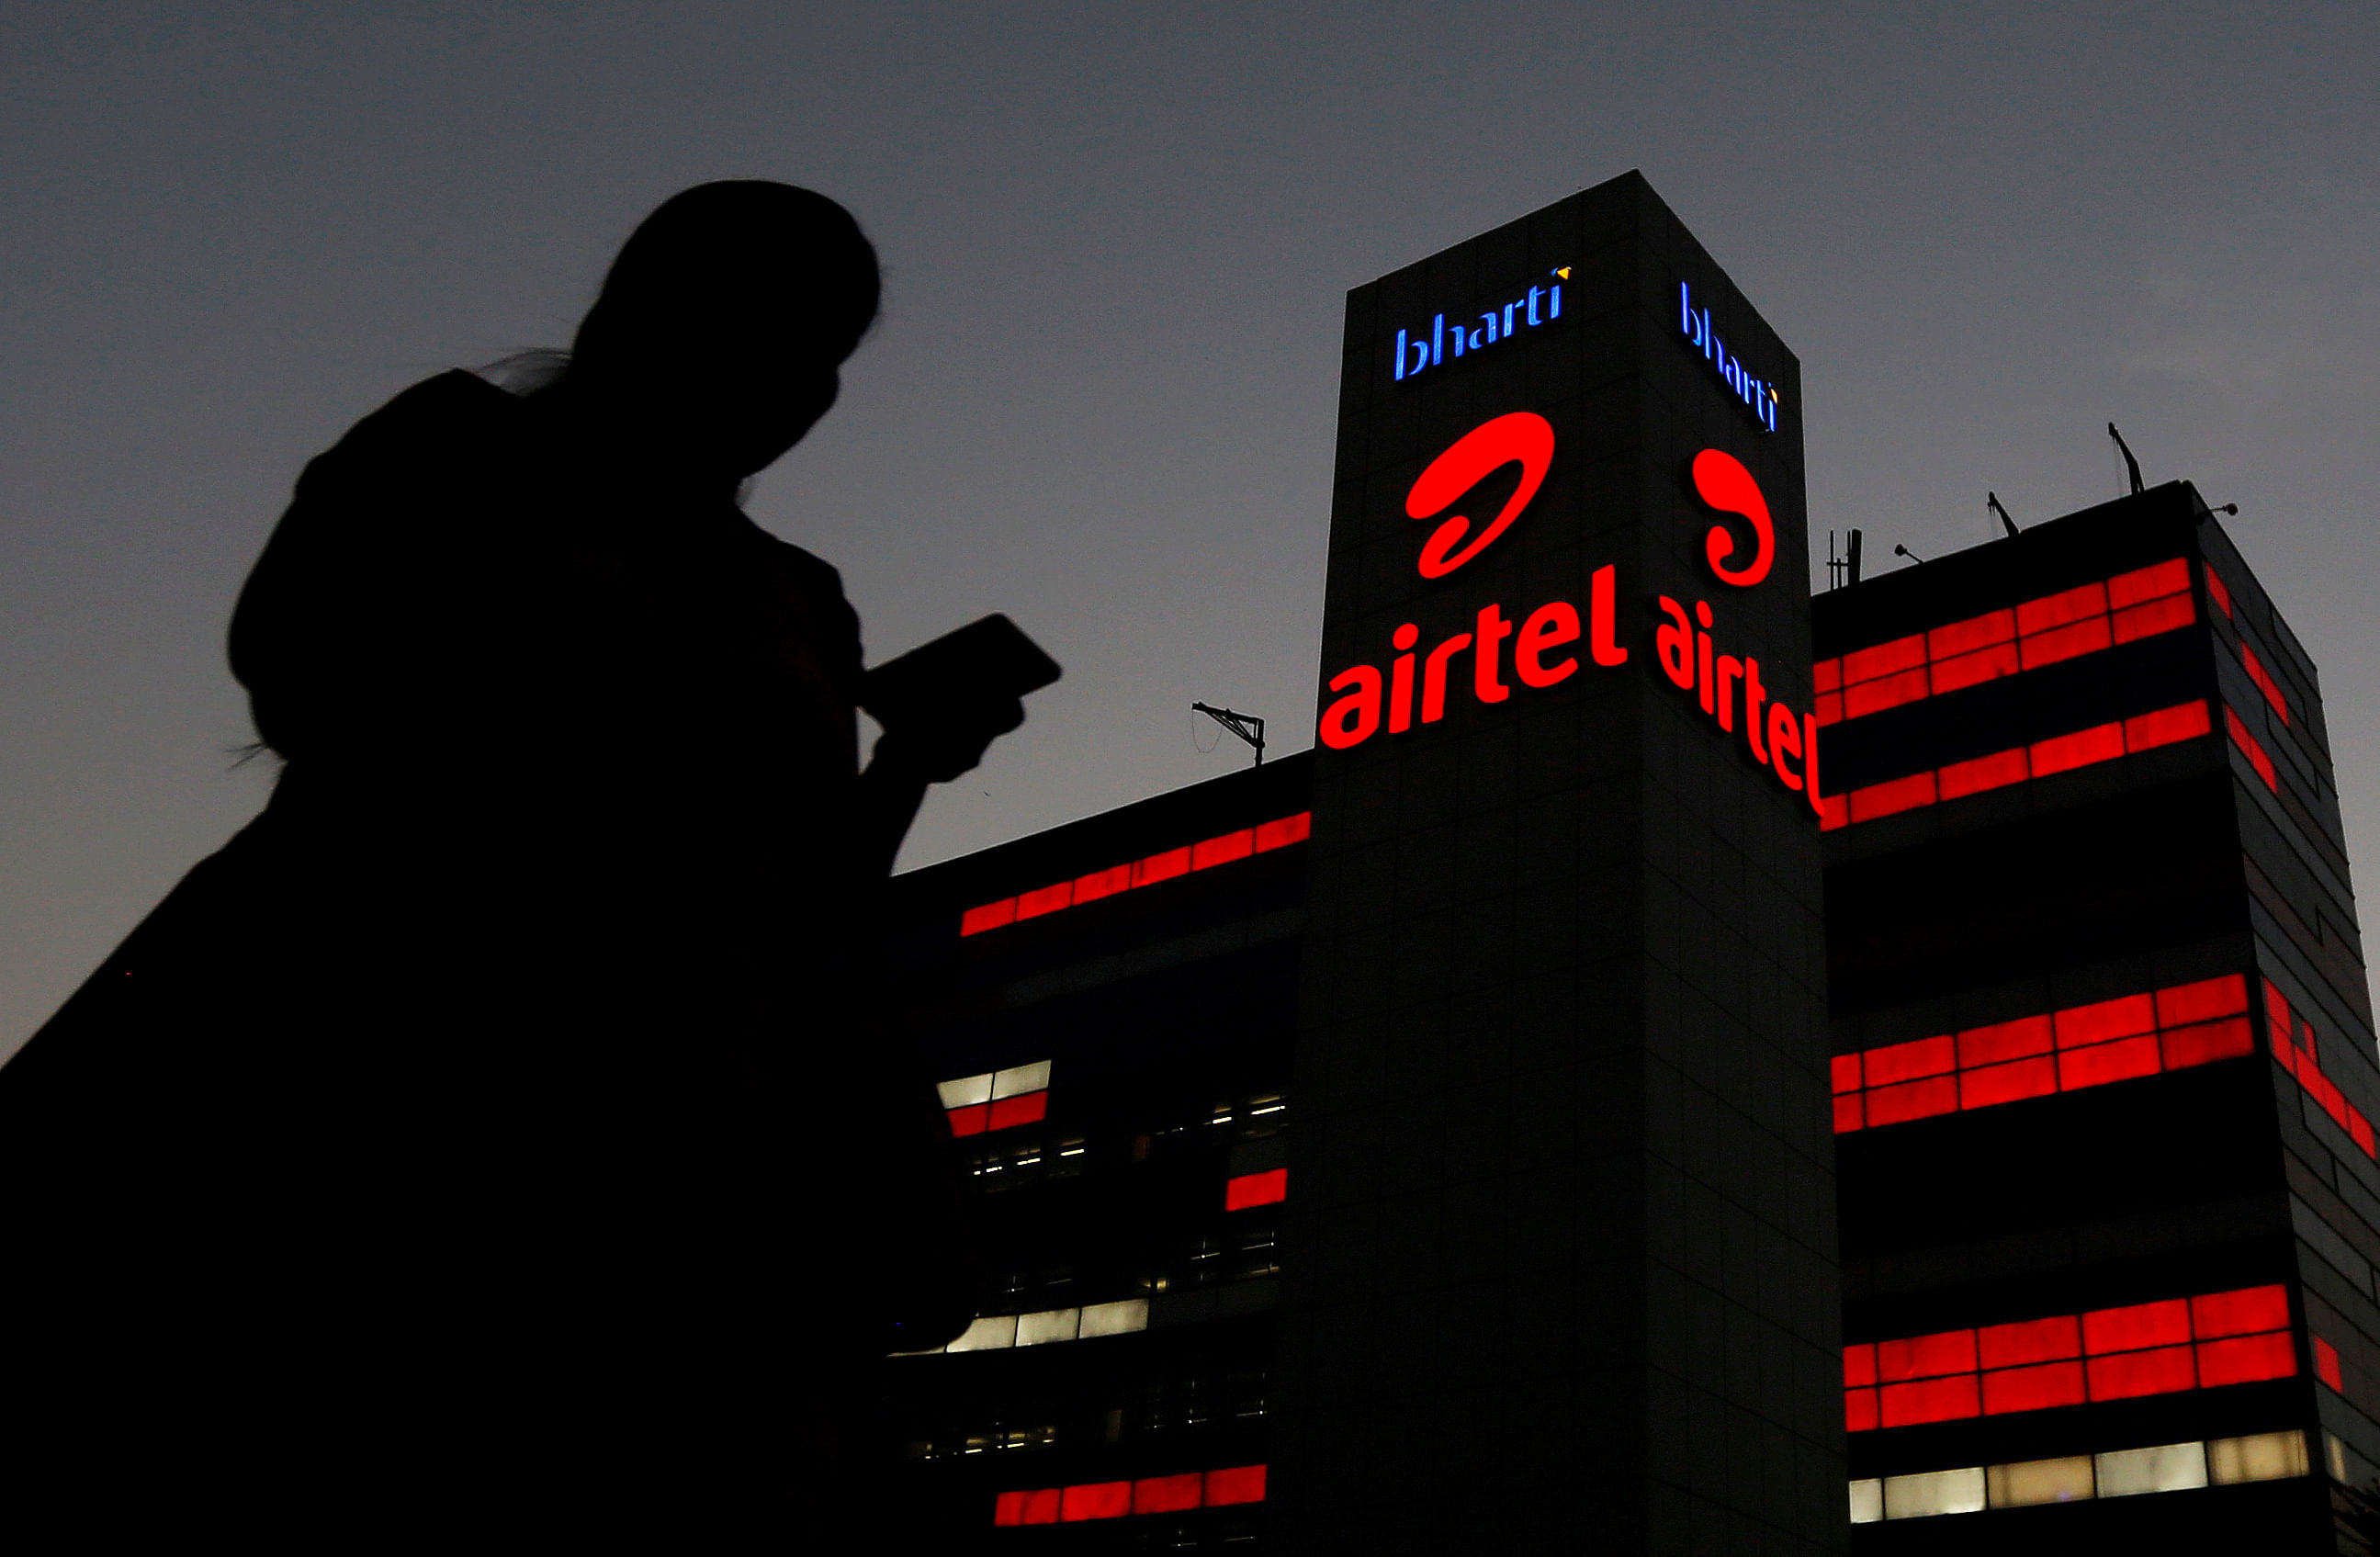 A girl checks her mobile phone as she walks past the Bharti Airtel office building in Gurugram, previously known as Gurgaon, on the outskirts of New Delhi. (Reuters Photo)